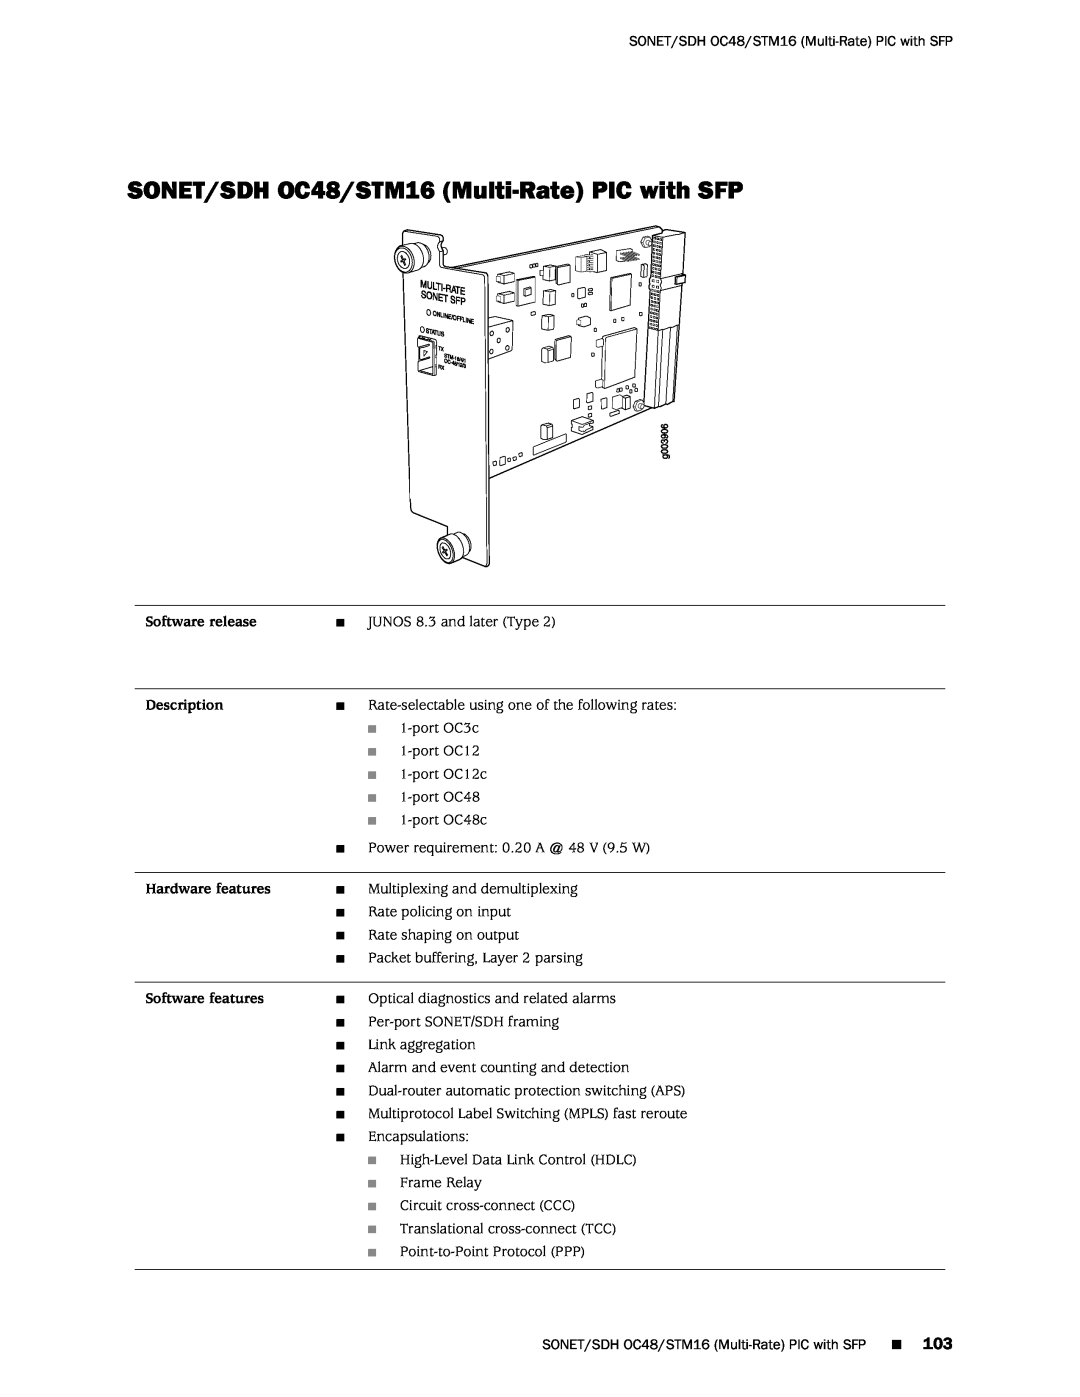 Juniper Networks M120 manual SONET/SDH OC48/STM16 Multi-Rate PIC with SFP, Software release, Description, Hardware features 